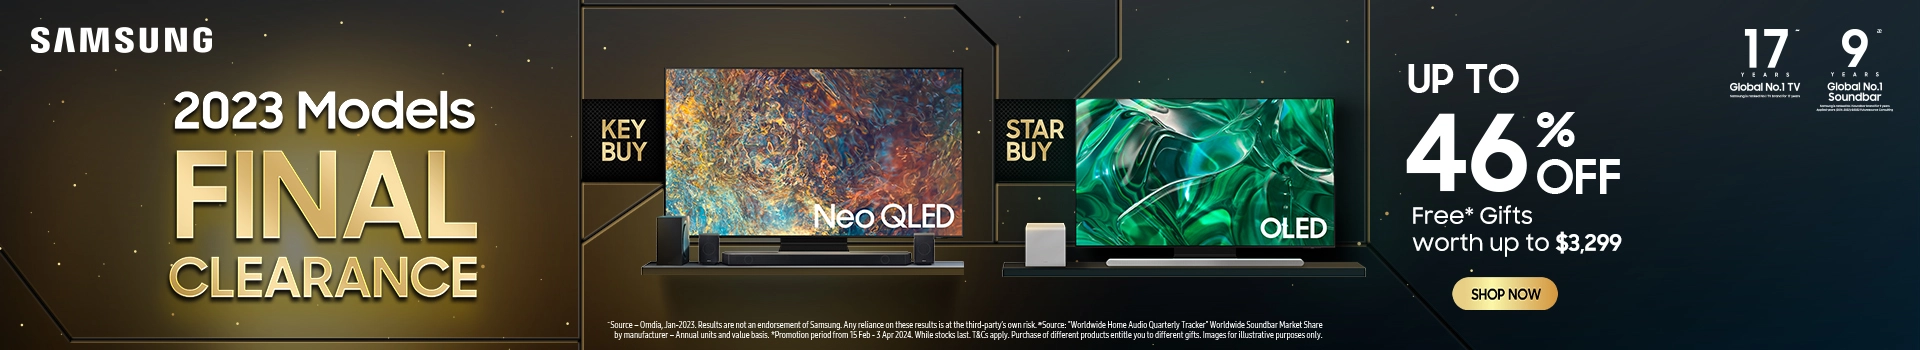 Samsung 2023 TV Models Final Clearance | Free Gifts Worth Up To $3299